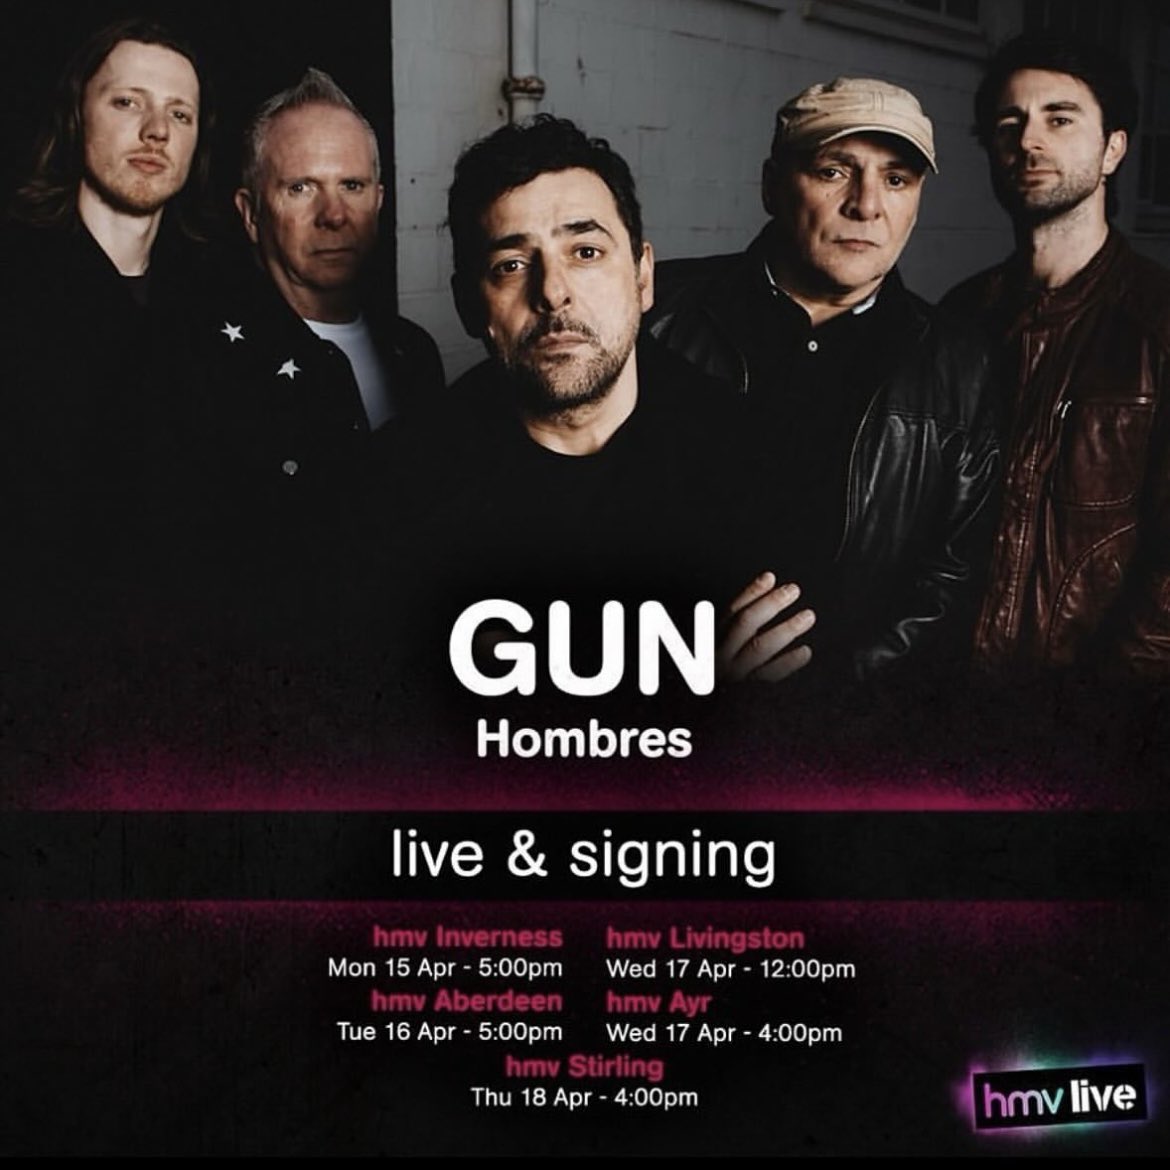 Just a reminder to get your tickets for @gunofficialuk back in our store next Monday at 5pm! All you have to do is preorder an album + event entry bundle via the link below: hmv.com/Live/Gun #hmvliveandlocal #liveandlocal #highlandfidelity #liveinverness @EastgateNess